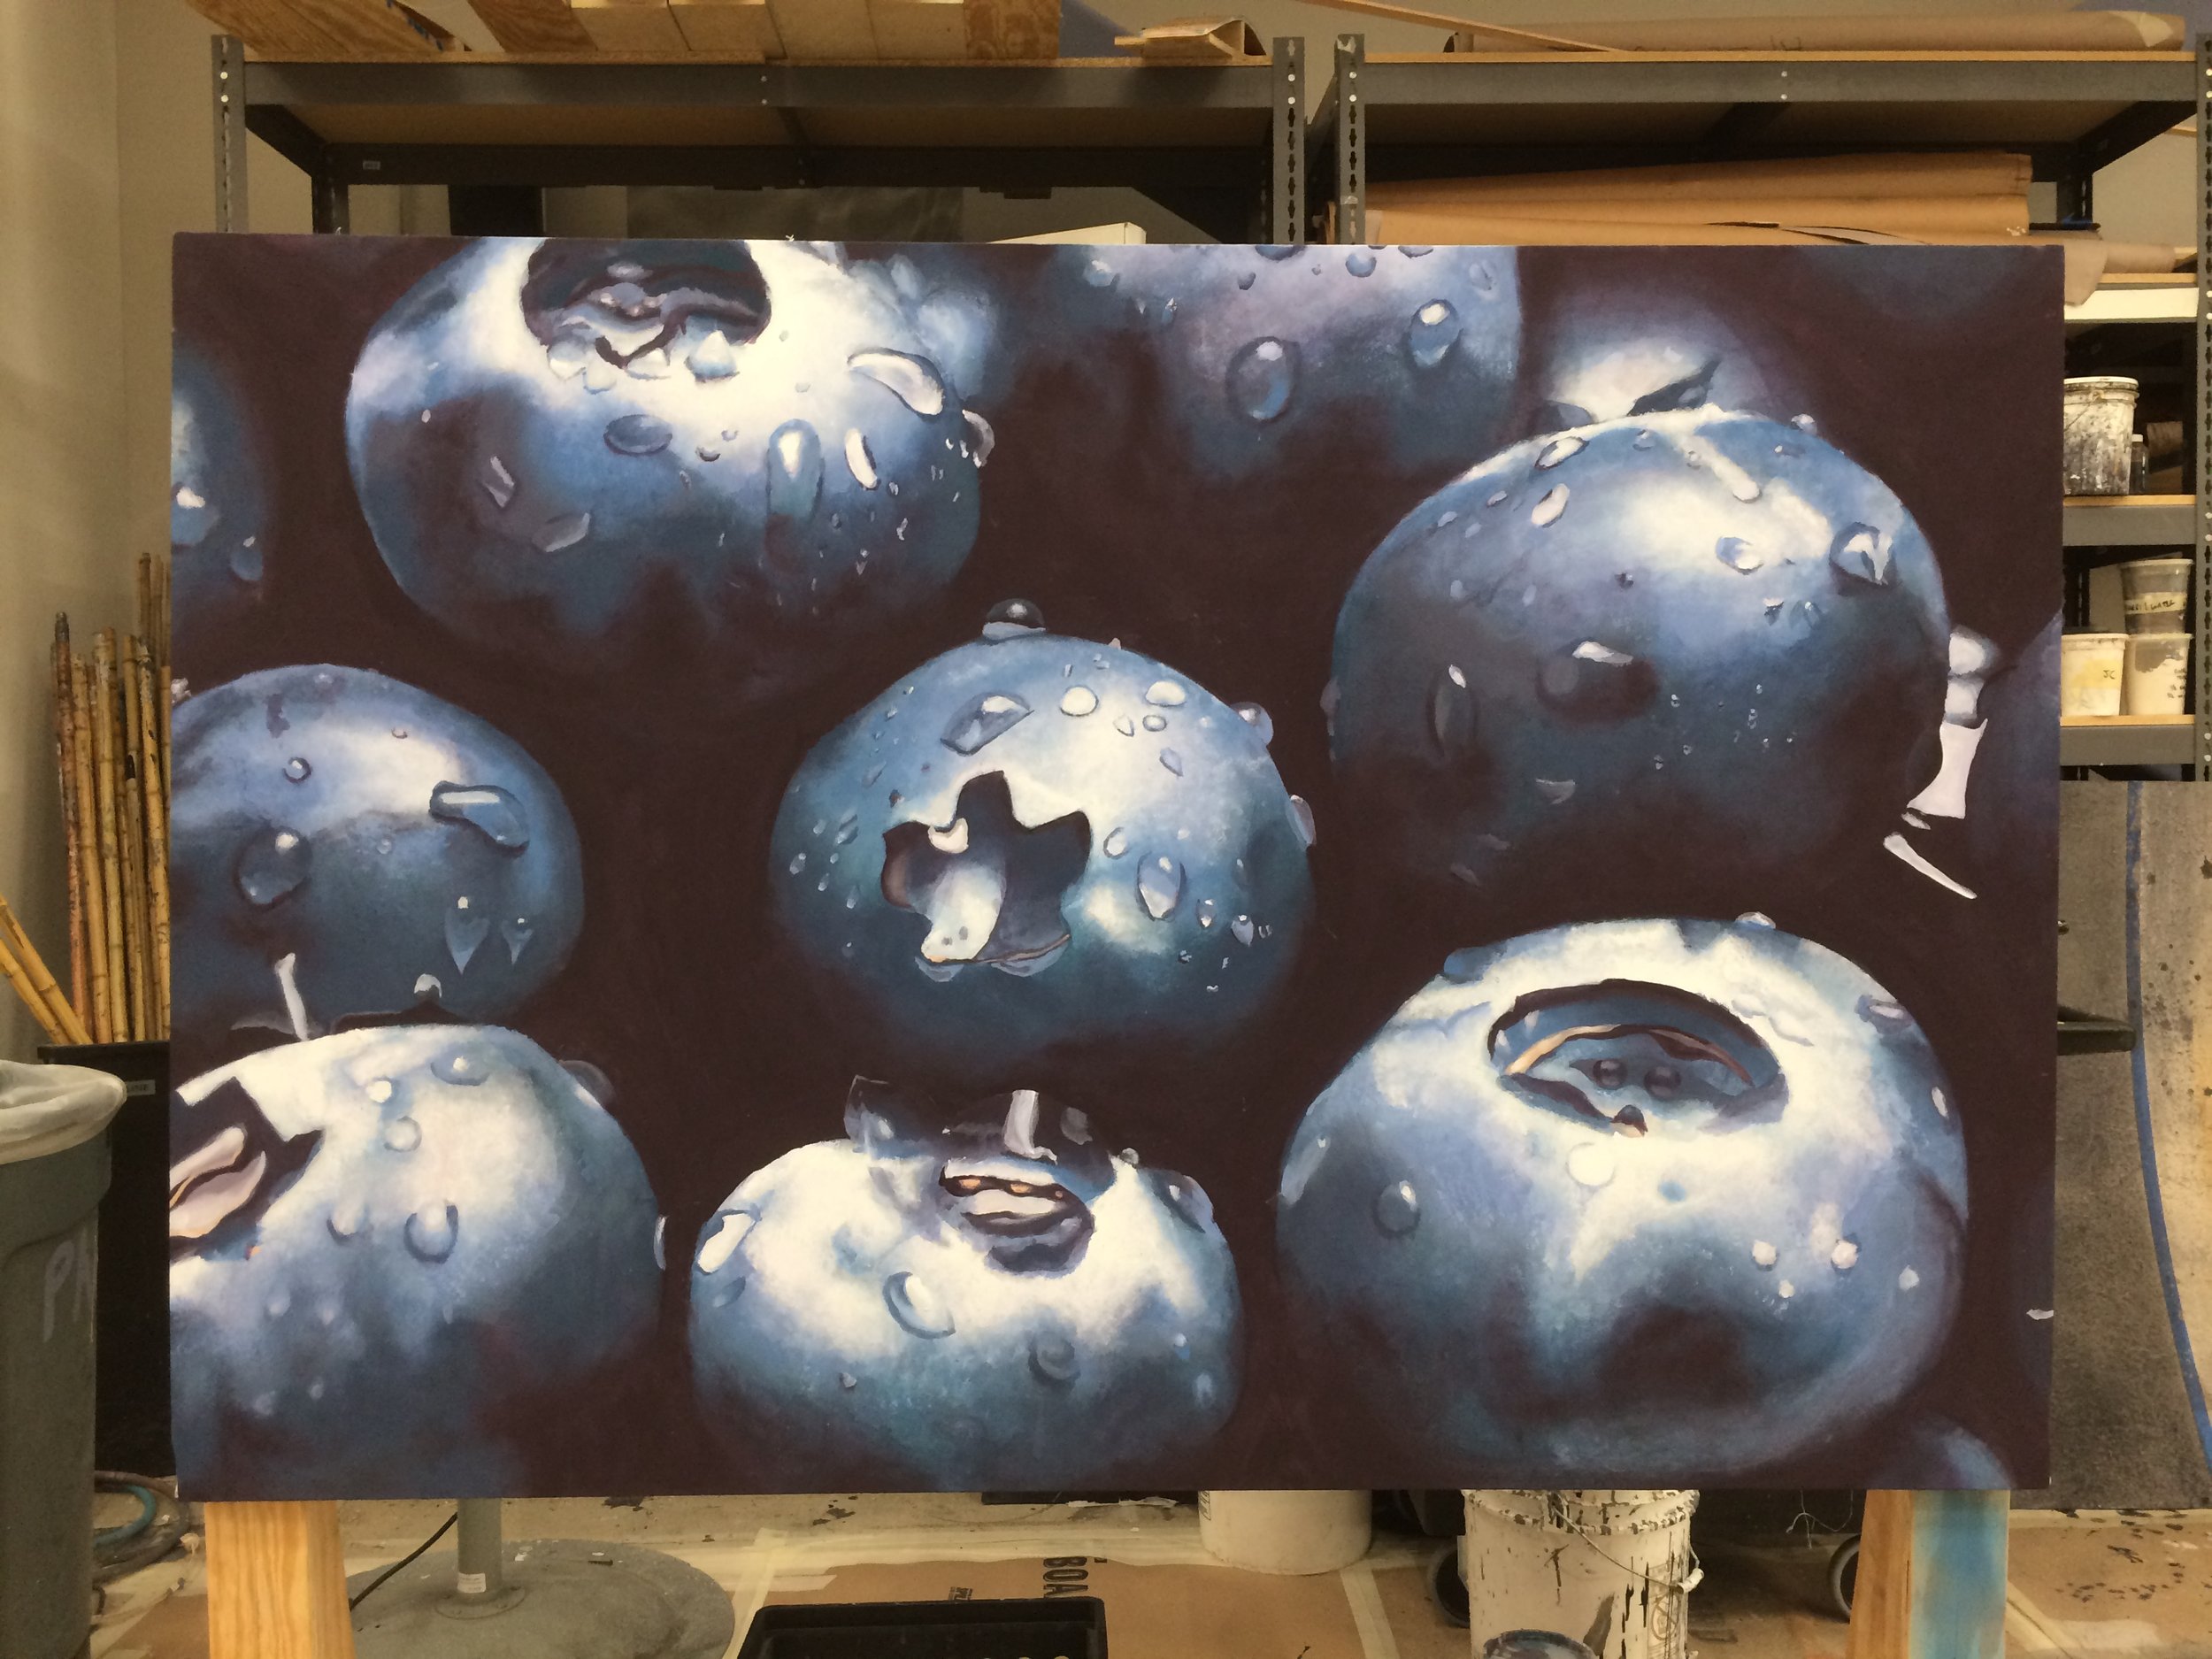  Reflective project: blueberries, Boston University, 2018. 4’ by 6’ soft cover muslin flat.  